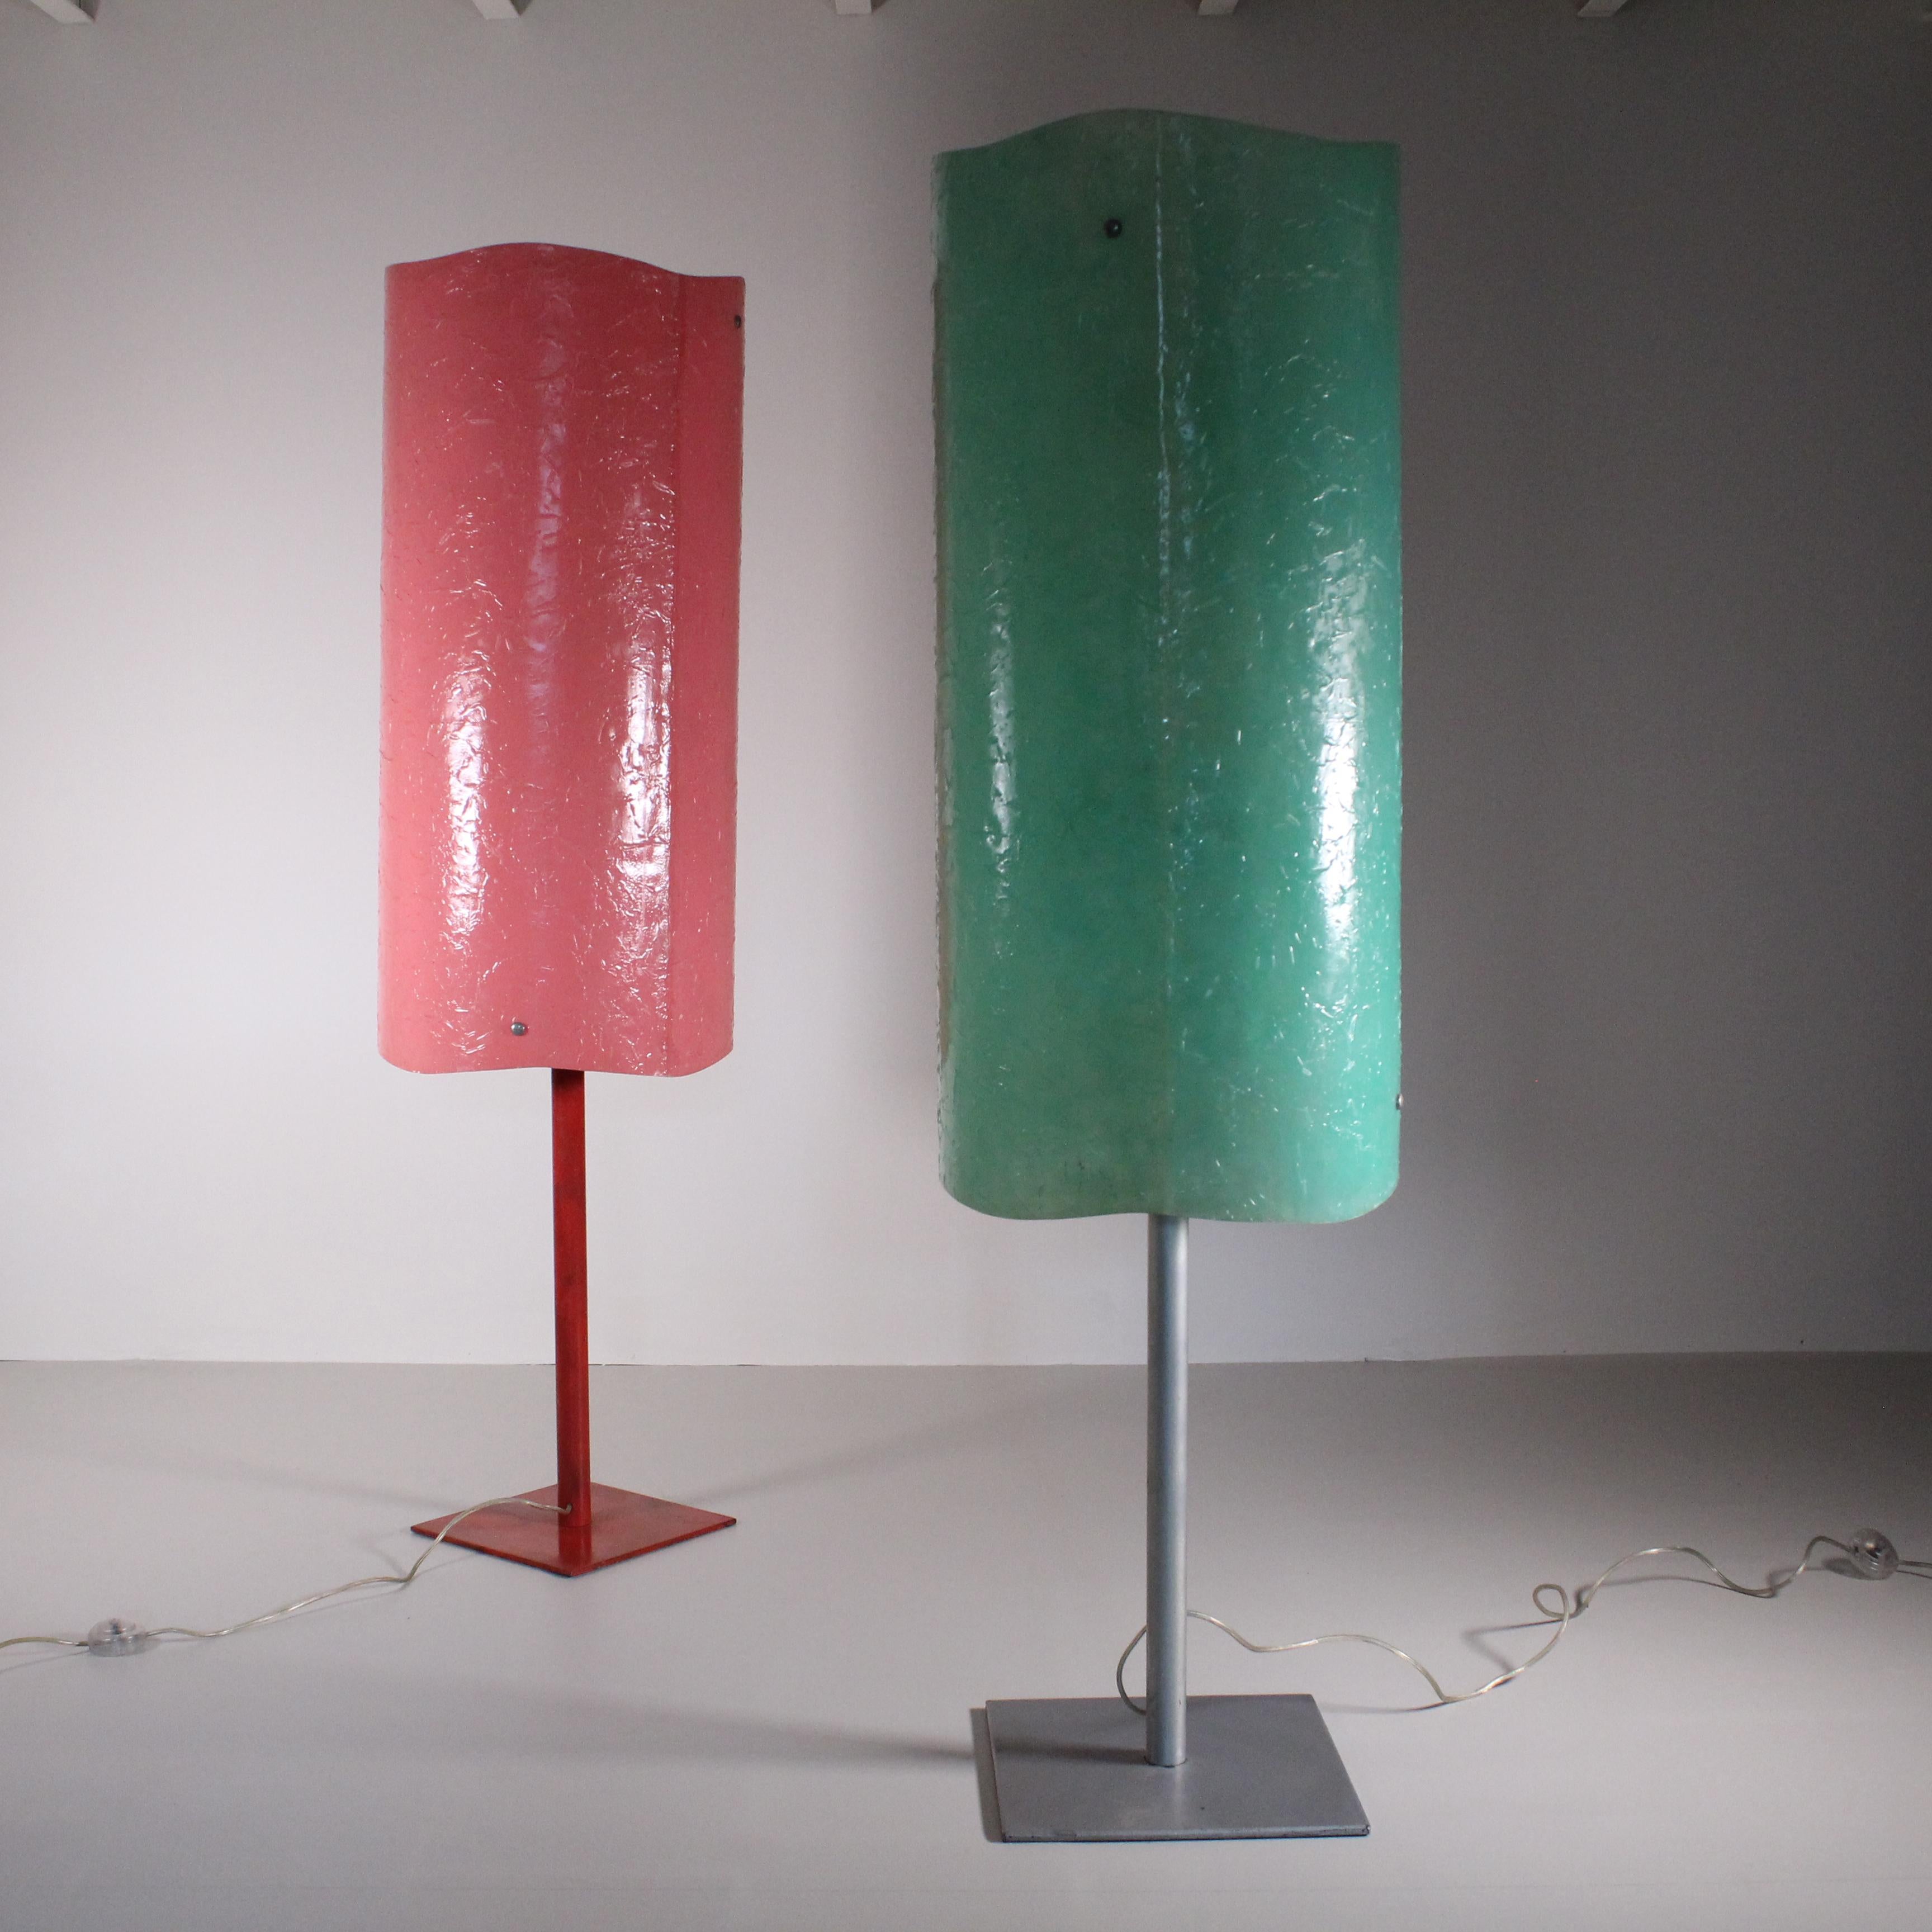 pair of resin floor lamps, probably inspired by Gaetano Pesce's work on resin, these two lamps are really something unique and unobtainable. Coming from a villa in Tuscany, along with other unique items, these two lamps are perfect if you have a